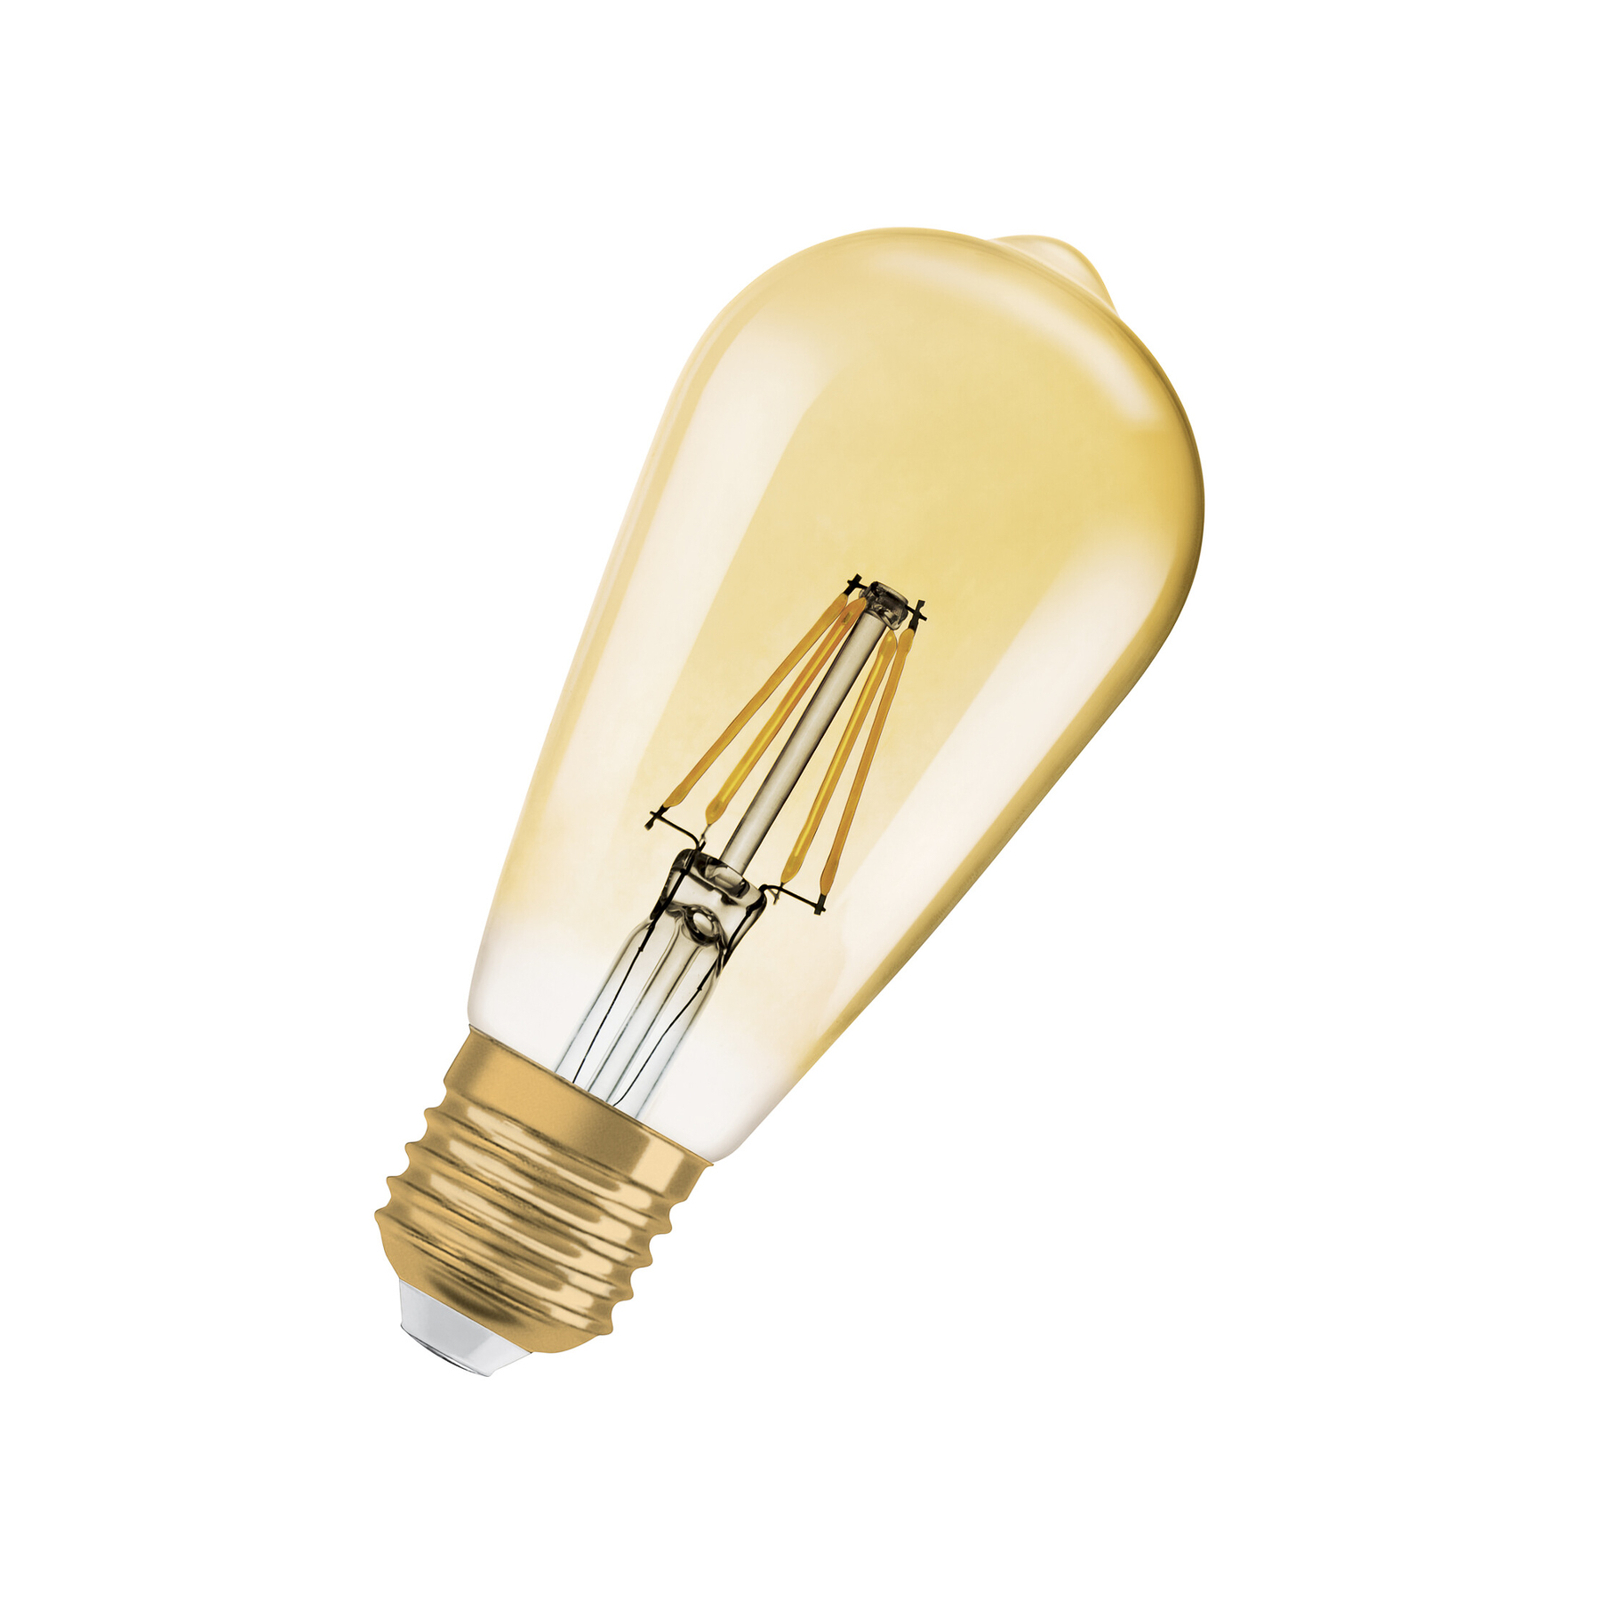 OSRAM LED Vintage 1906 Edison, gold, E27, 6.5 W, 824, dimmable.